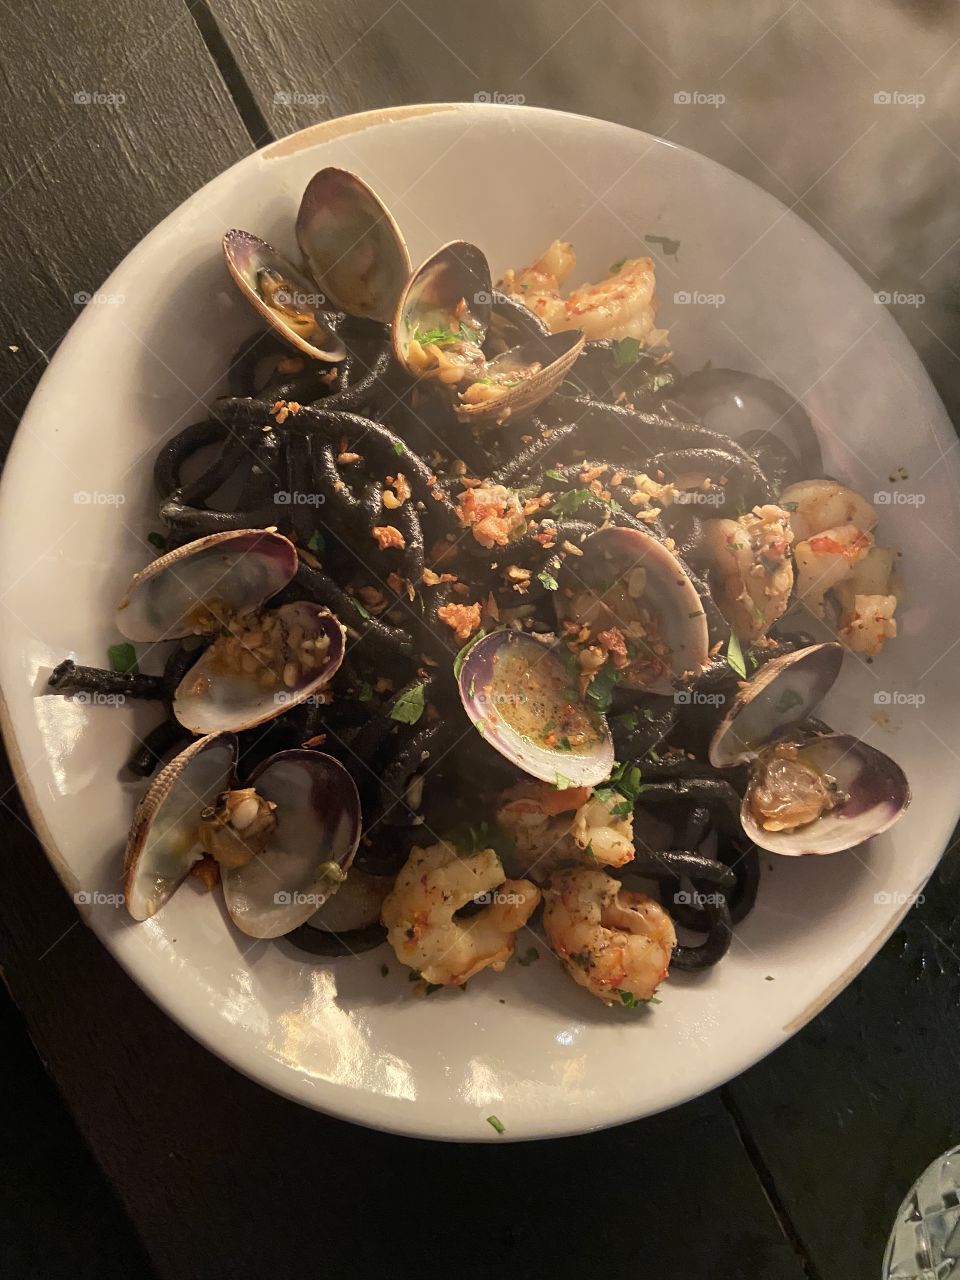 Delicious squid ink pasta with clams and shrimp, in a garlic, lemon, chili, caper sauce!